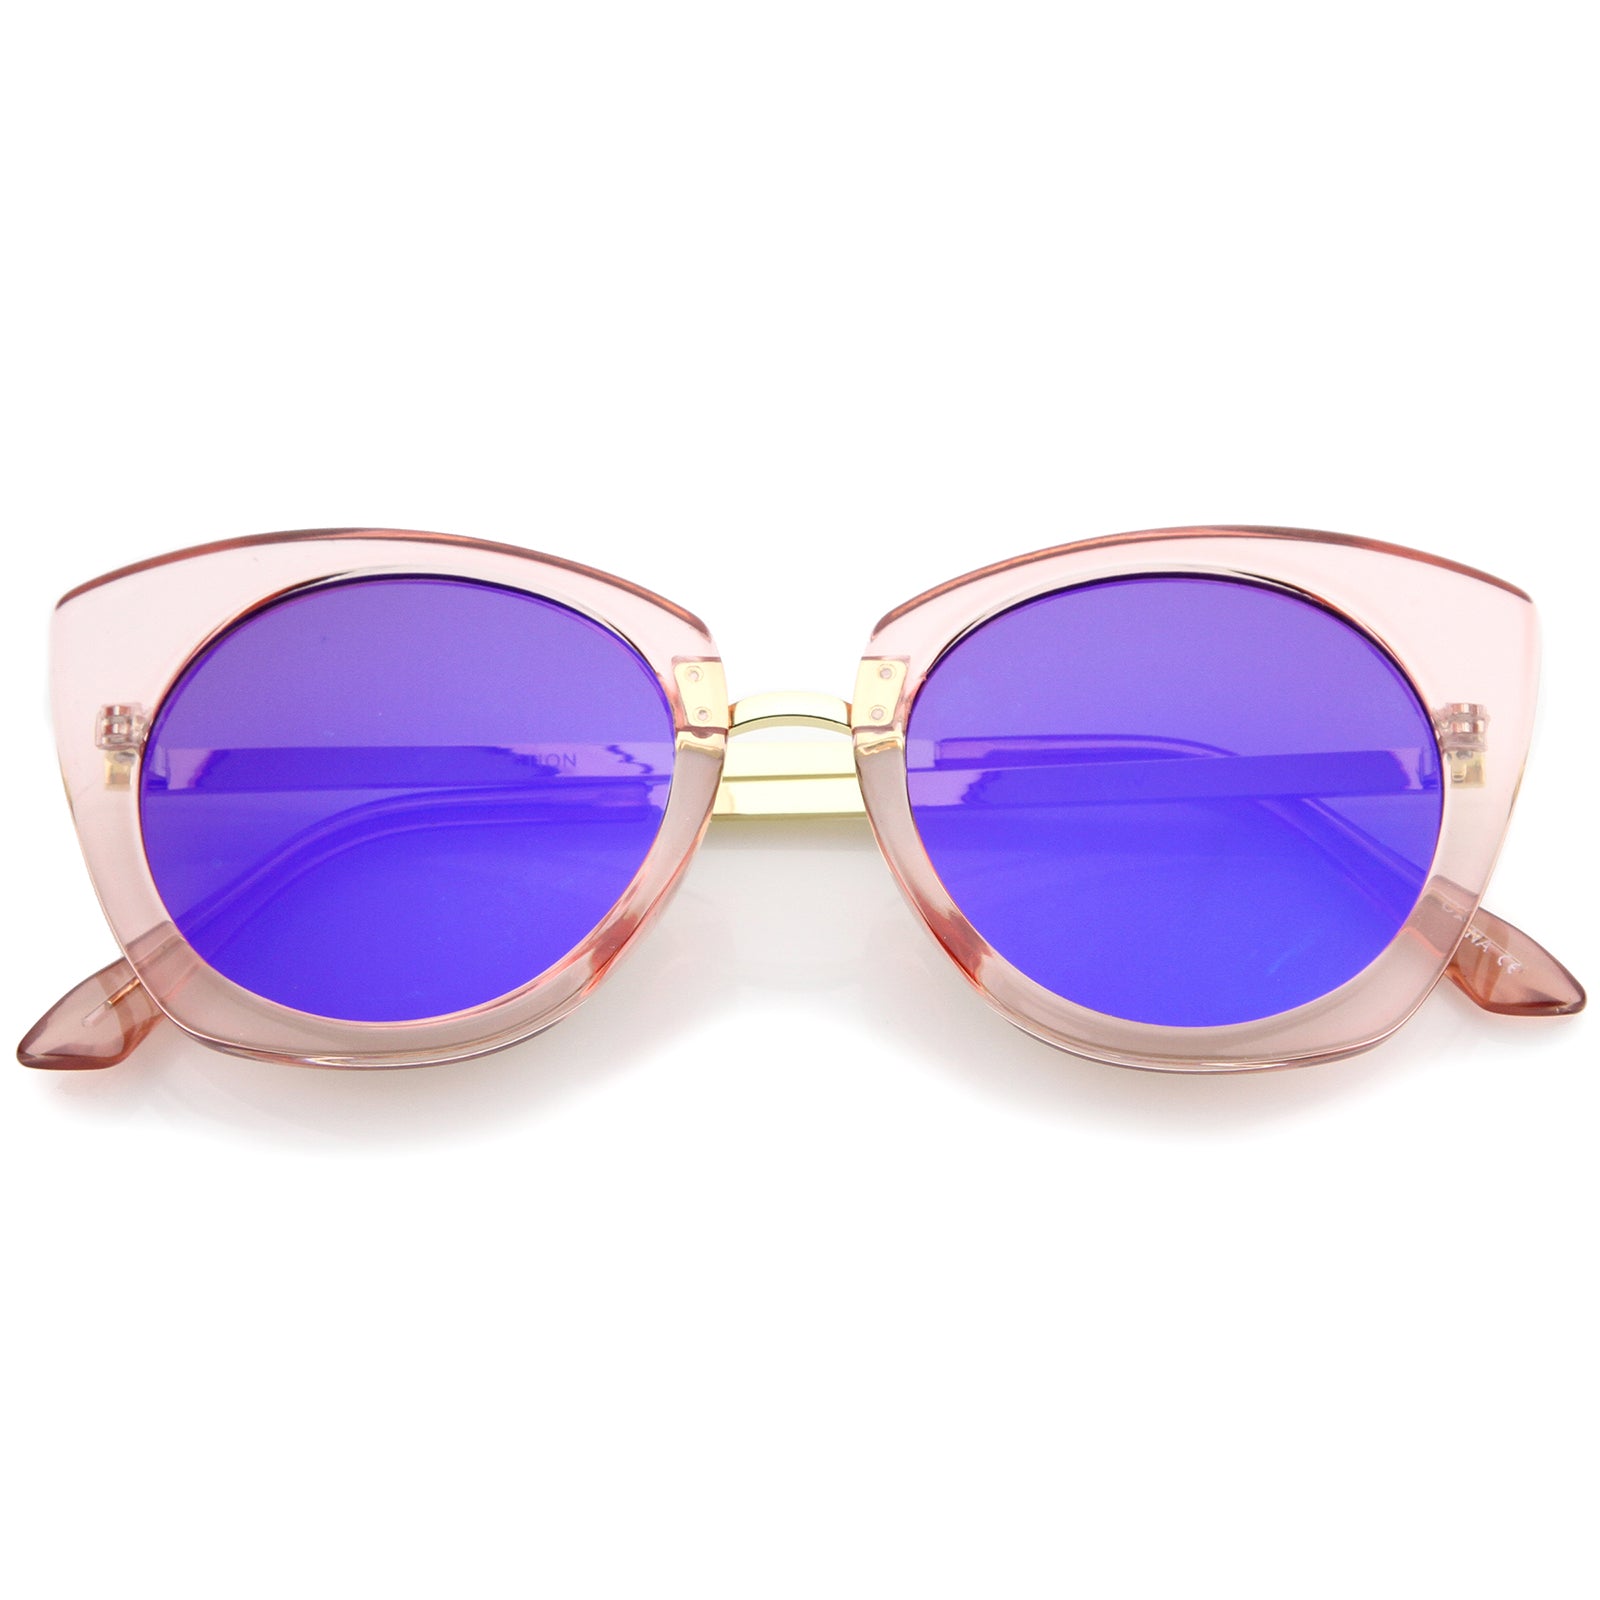 Flyer Cat Eye Sunglasses in Light Gold and Pink by LINDA FARROW